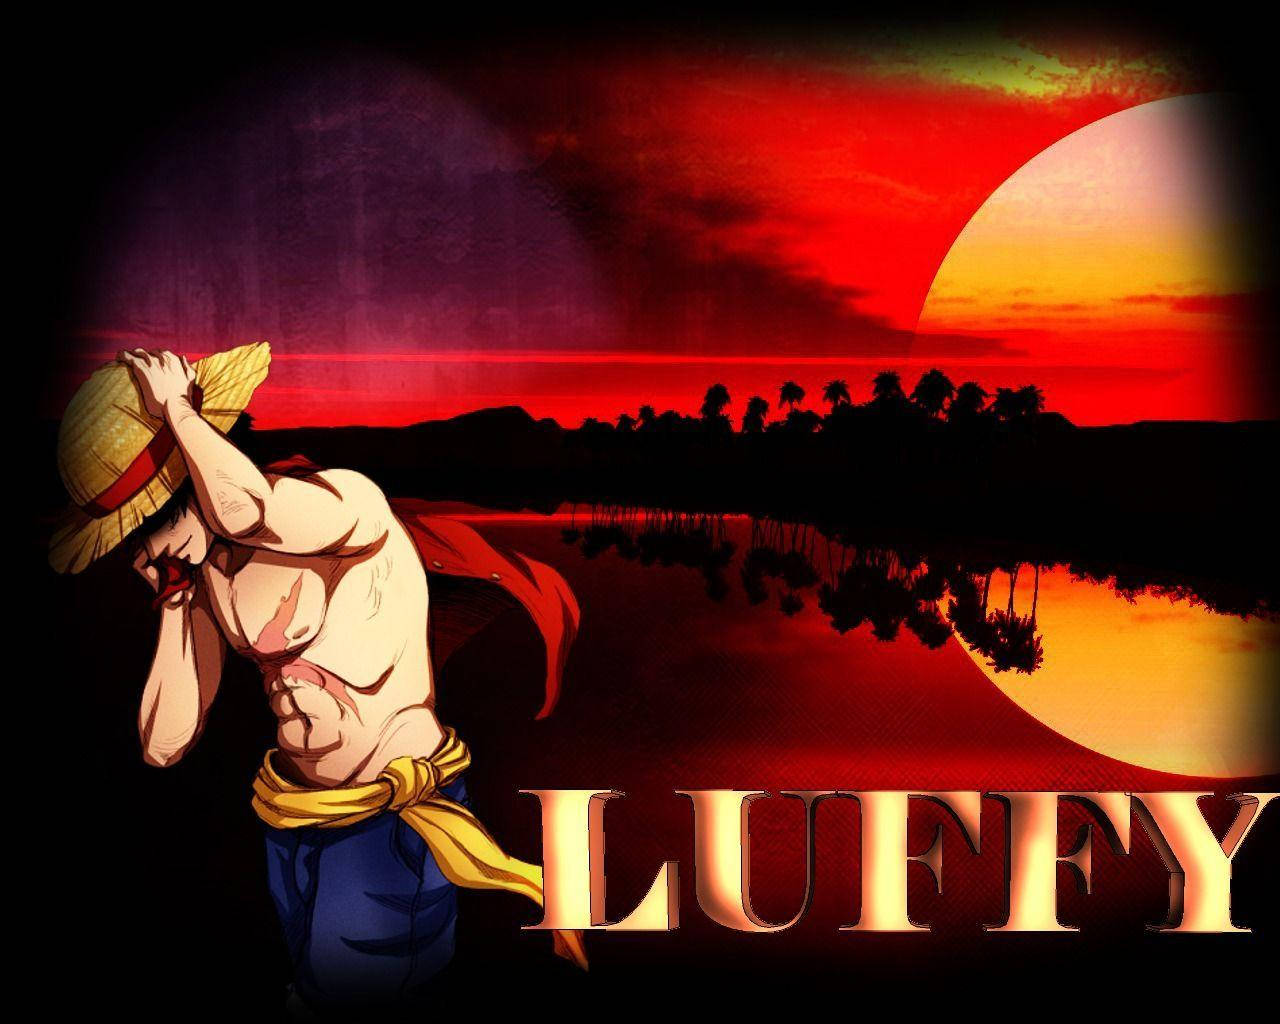 Luffy Red Sky Poster